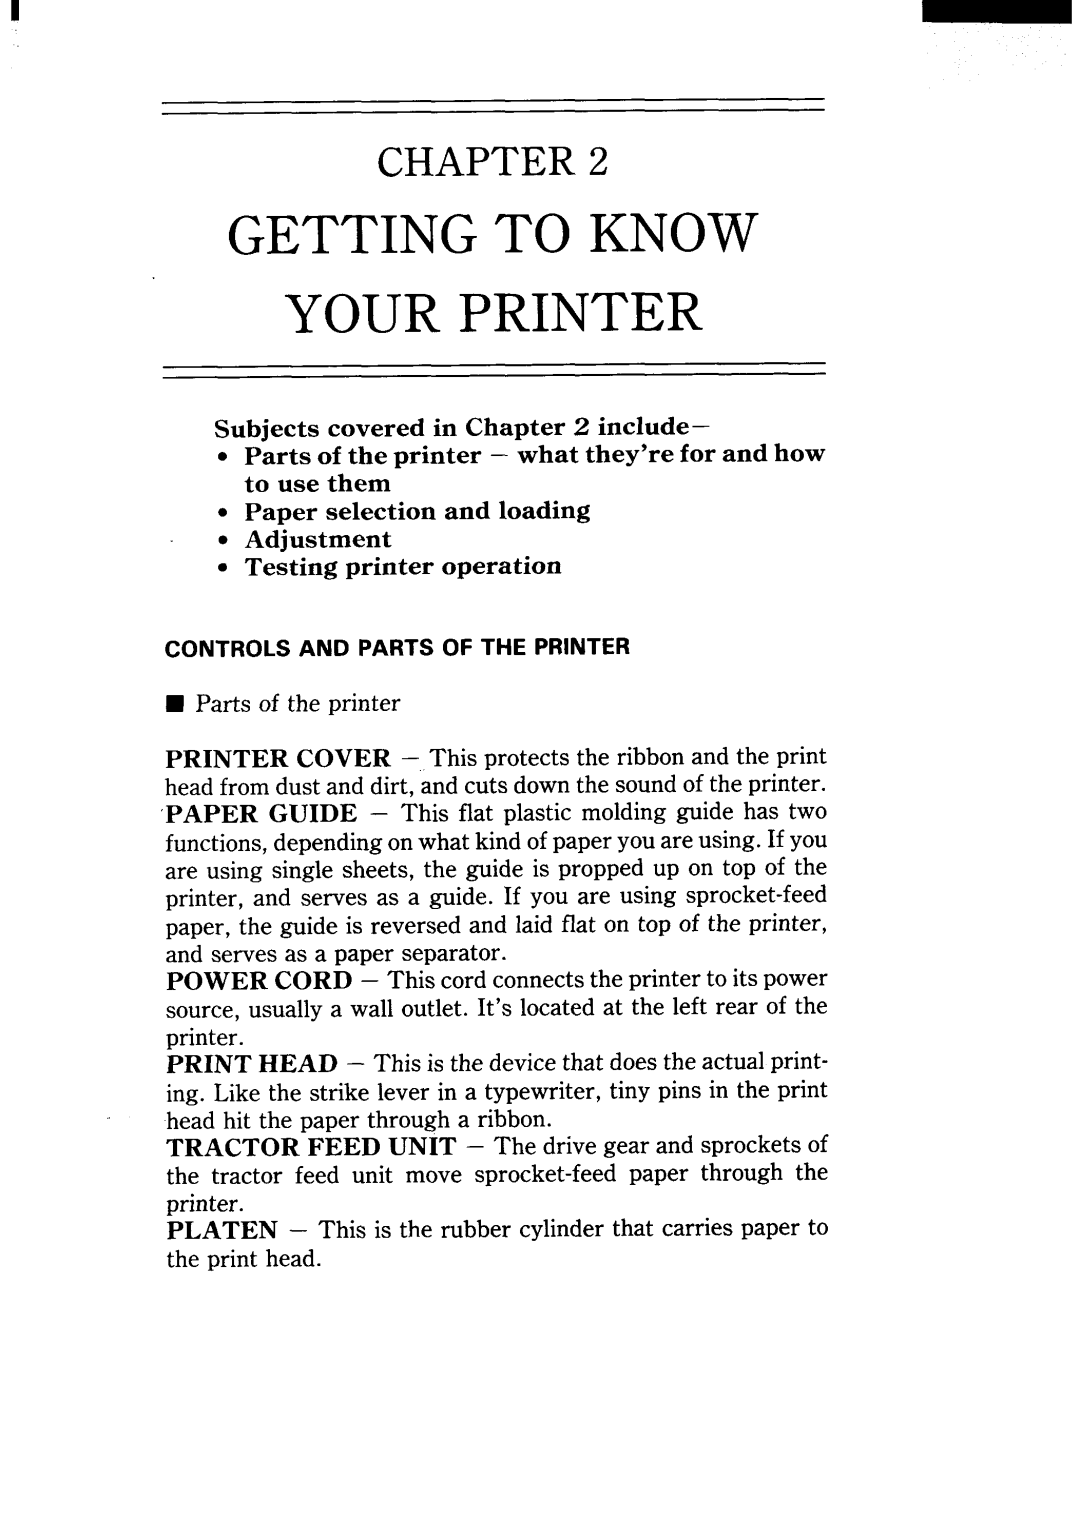 Star Micronics NX-15 user manual Getting To Know Your Printer, Chapter, Subjectscoveredin include 